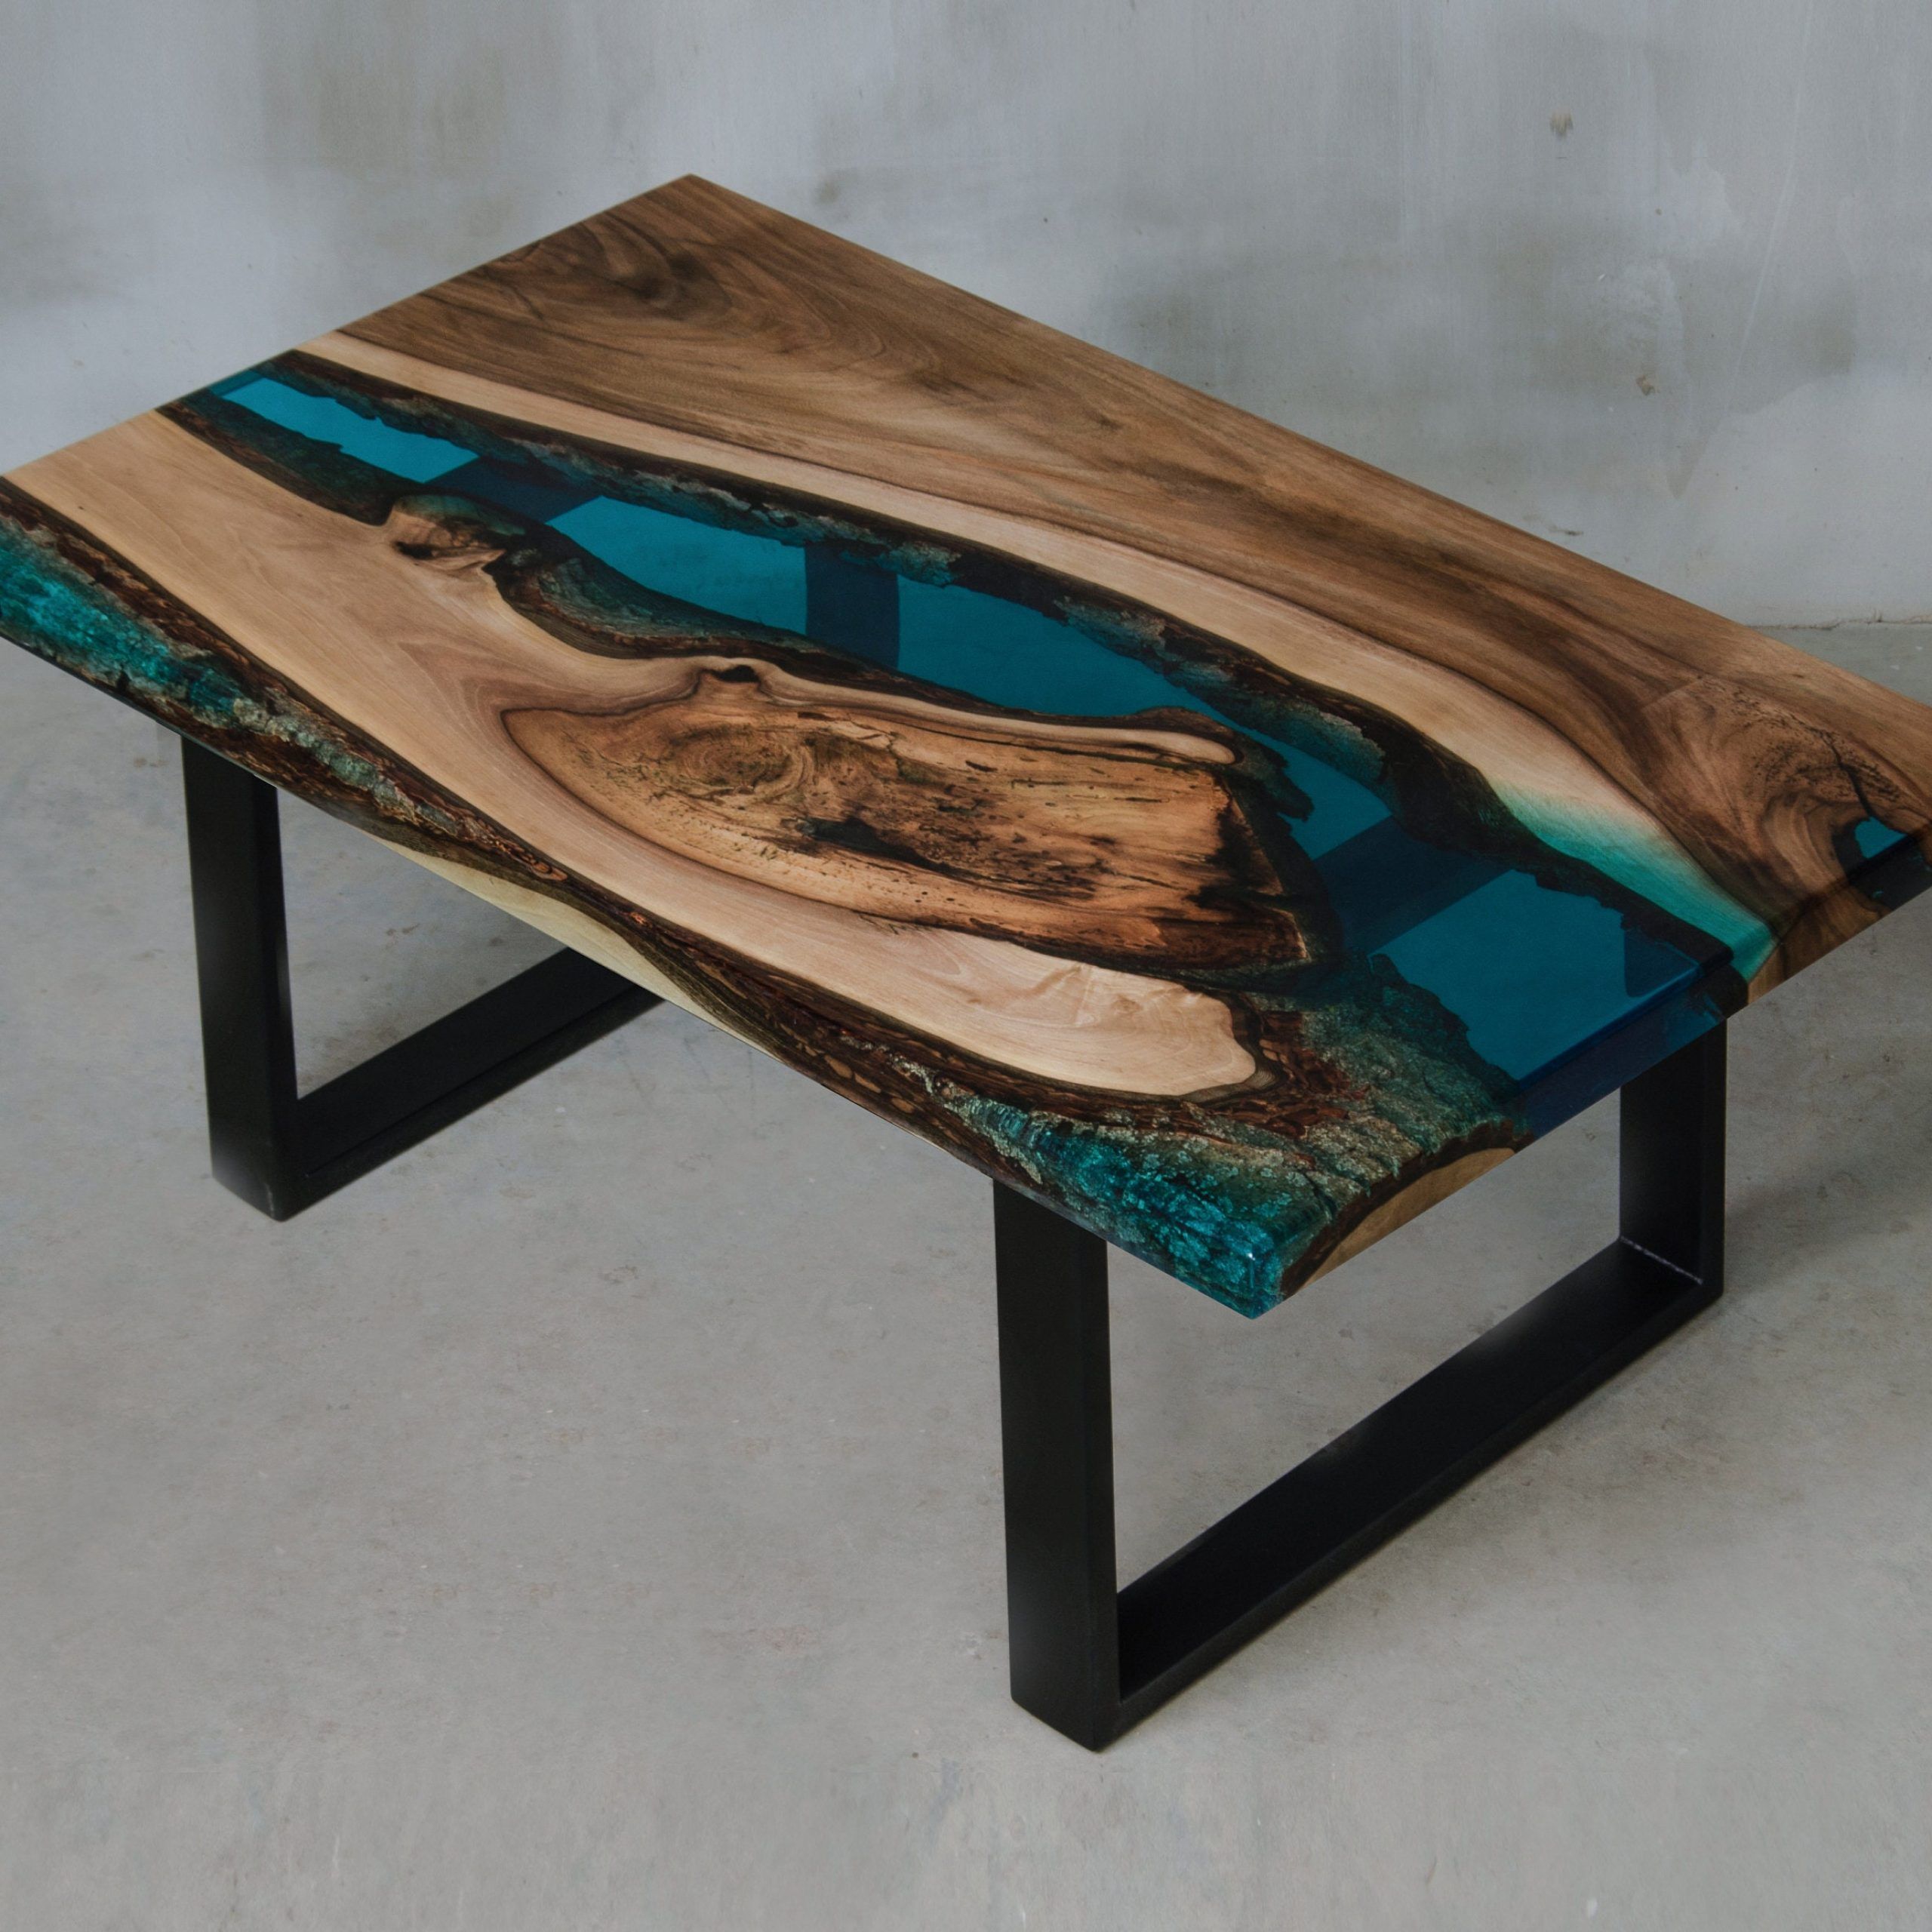 Custom Live Edge Coffee Table Made With Walnut Blue Uv Resin – Etsy With Regard To Most Recent Resin Coffee Tables (View 15 of 20)